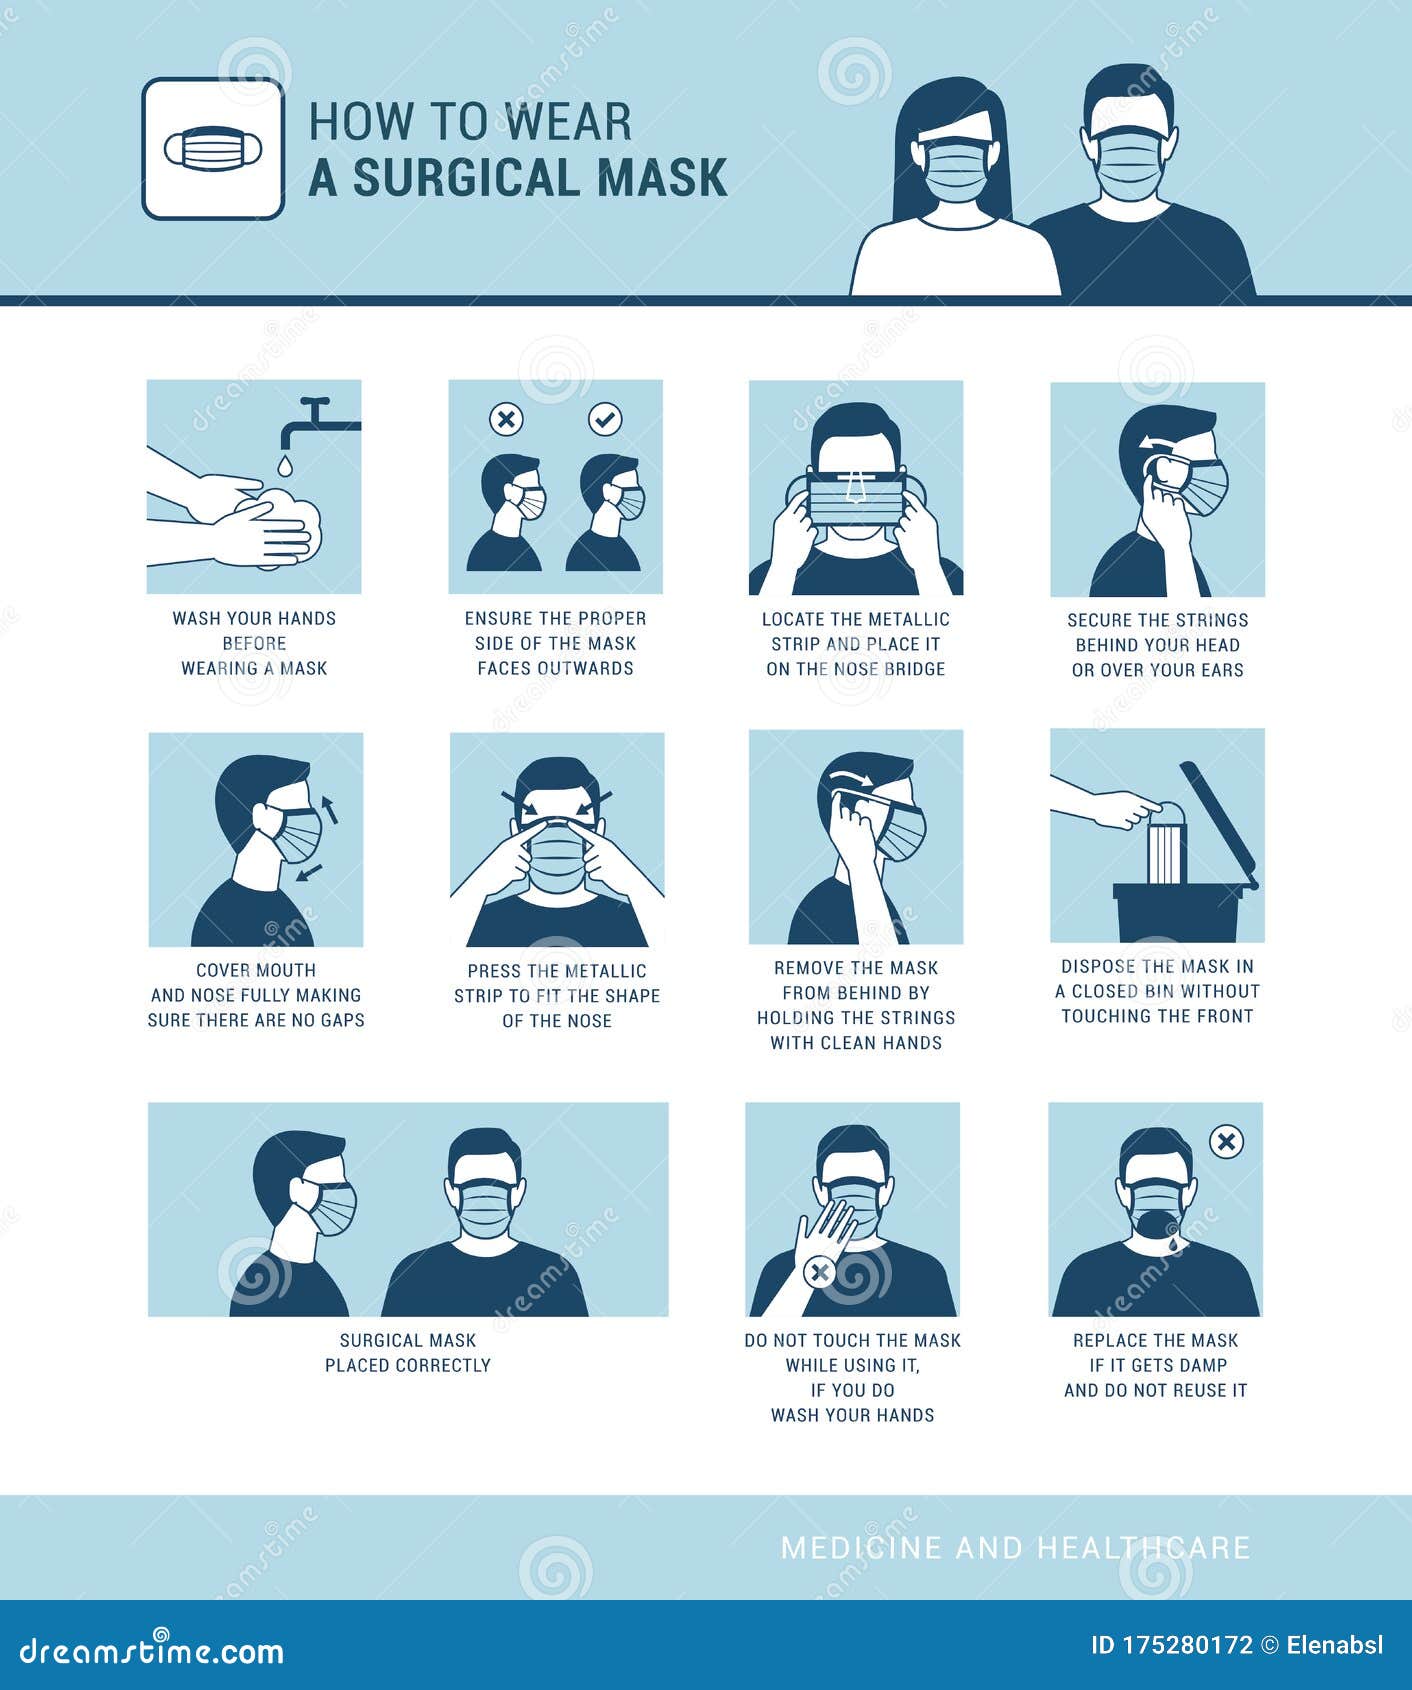 how to wear a surgical mask